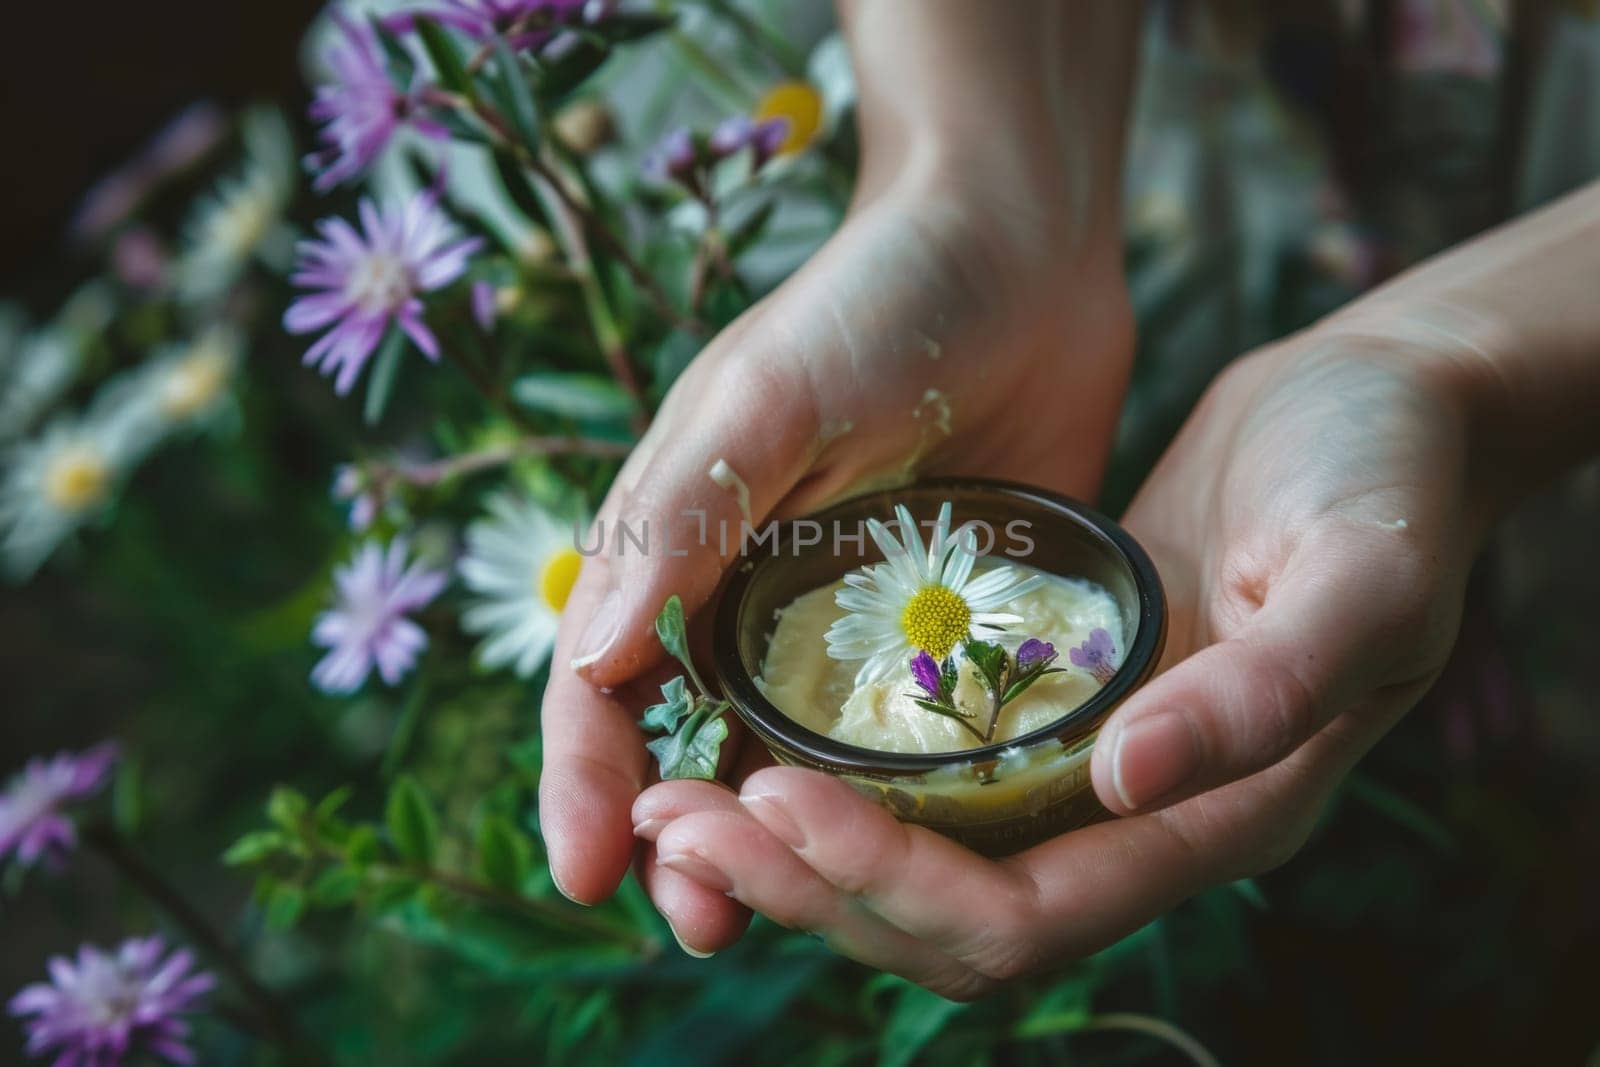 An intimate view of weathered hands applying a natural cream, conveying self-care and the nourishing properties of herbal products